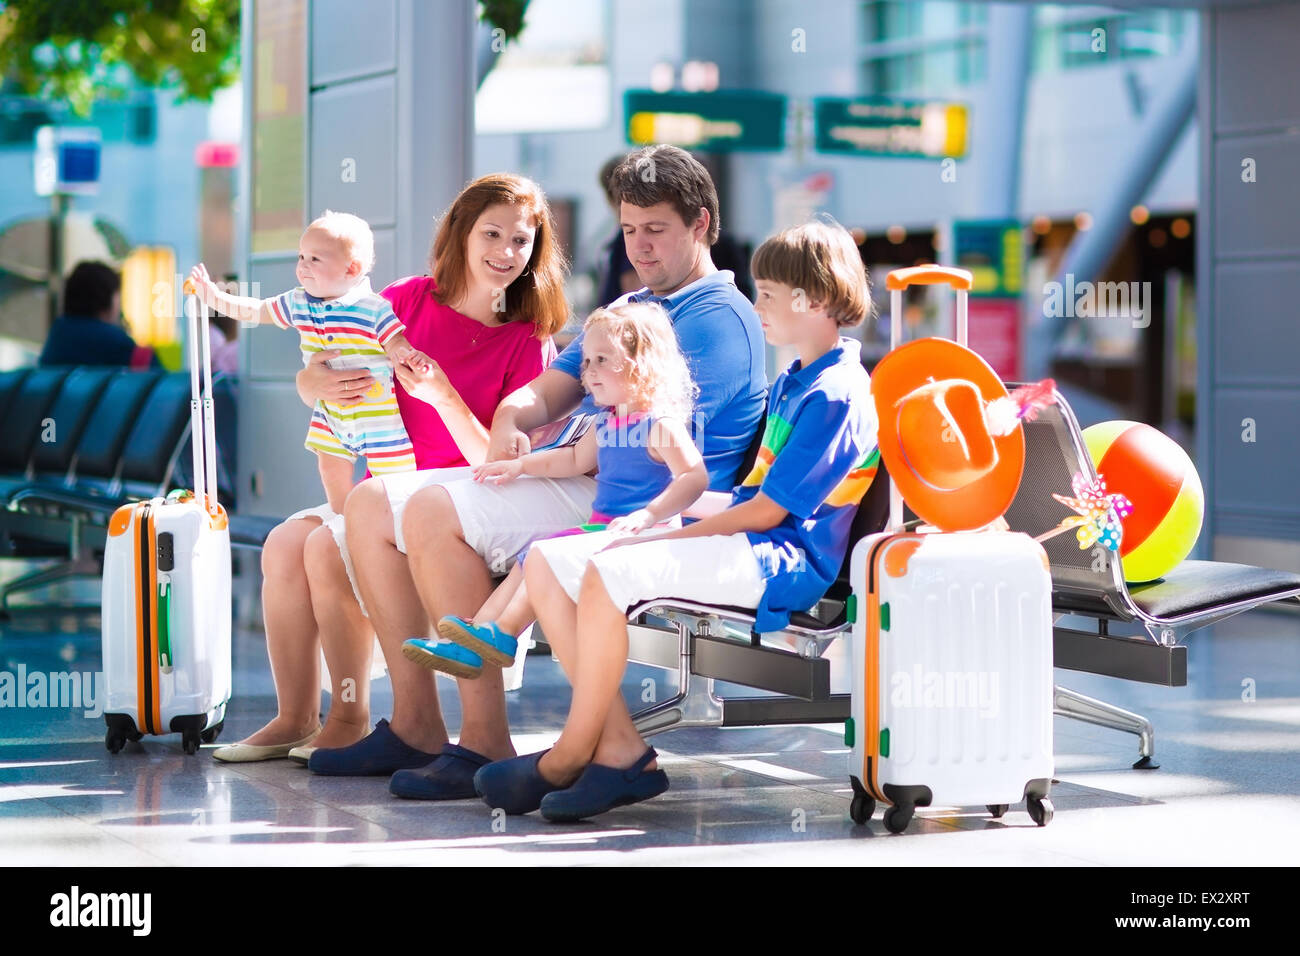 Family traveling with kids. Parents with children at international airport with luggage. Stock Photo